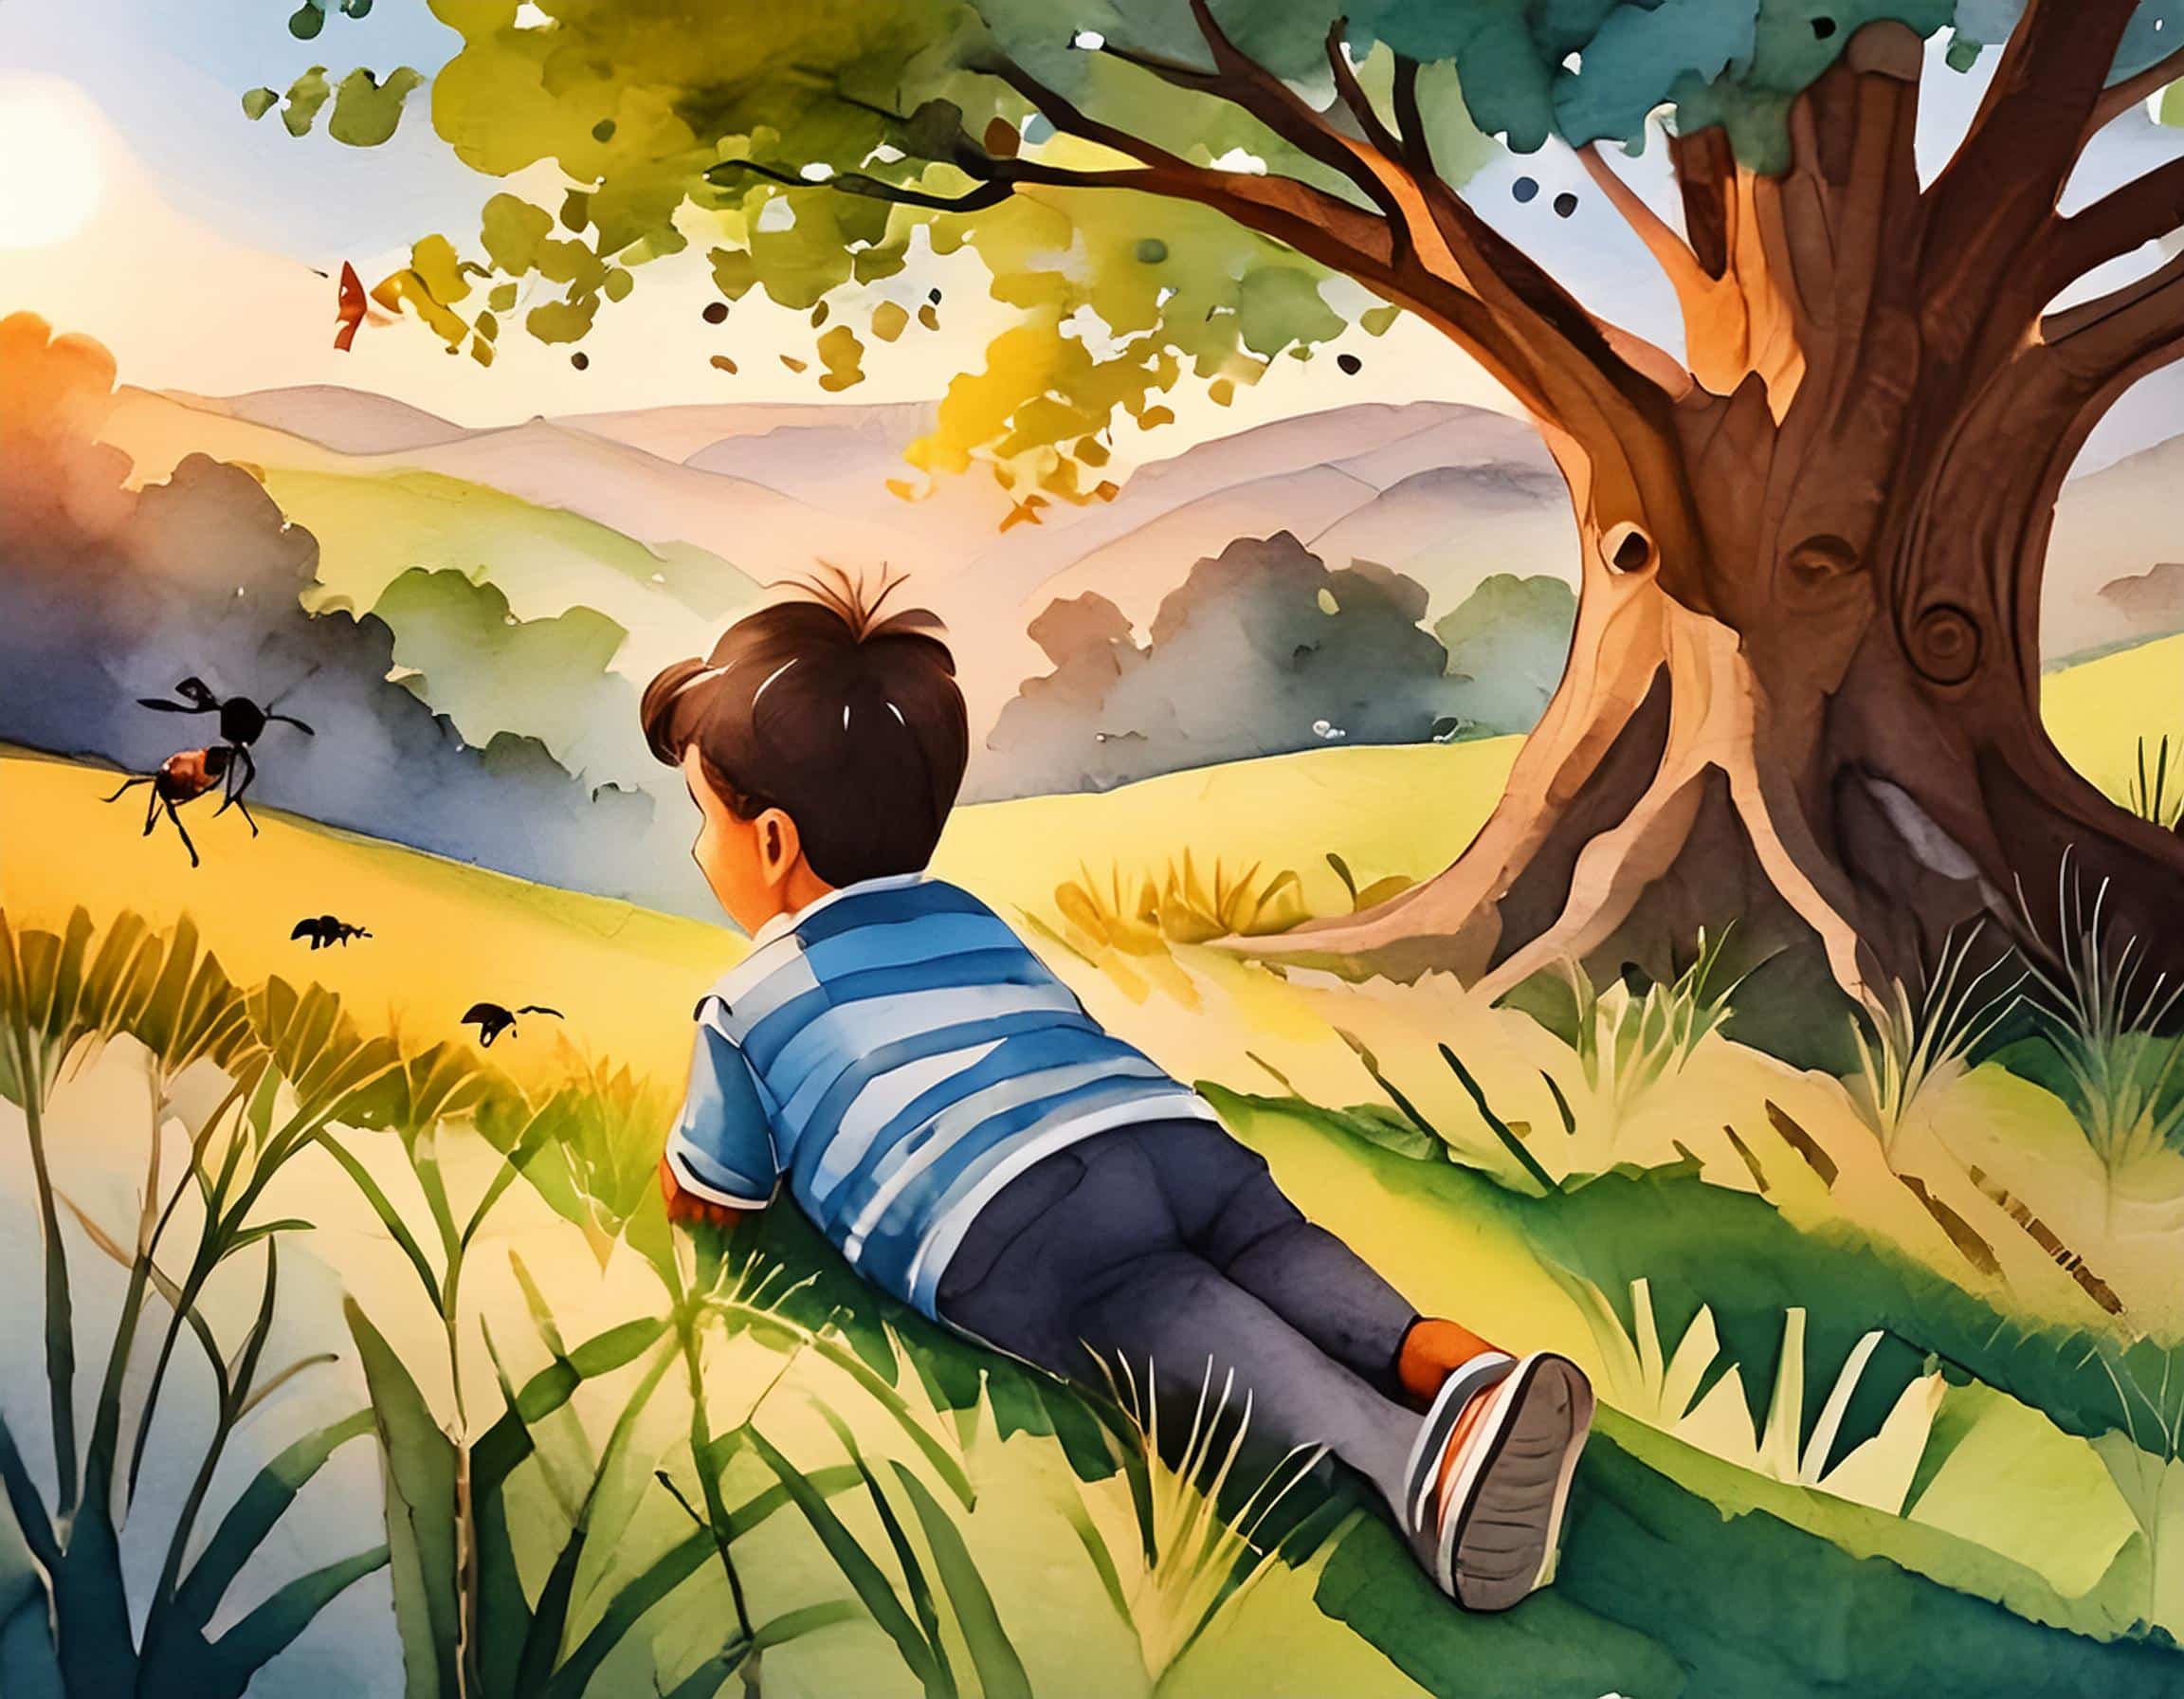 firefly young boy lying in the grass, he observes the ants in the shade of a majestic tree 85433